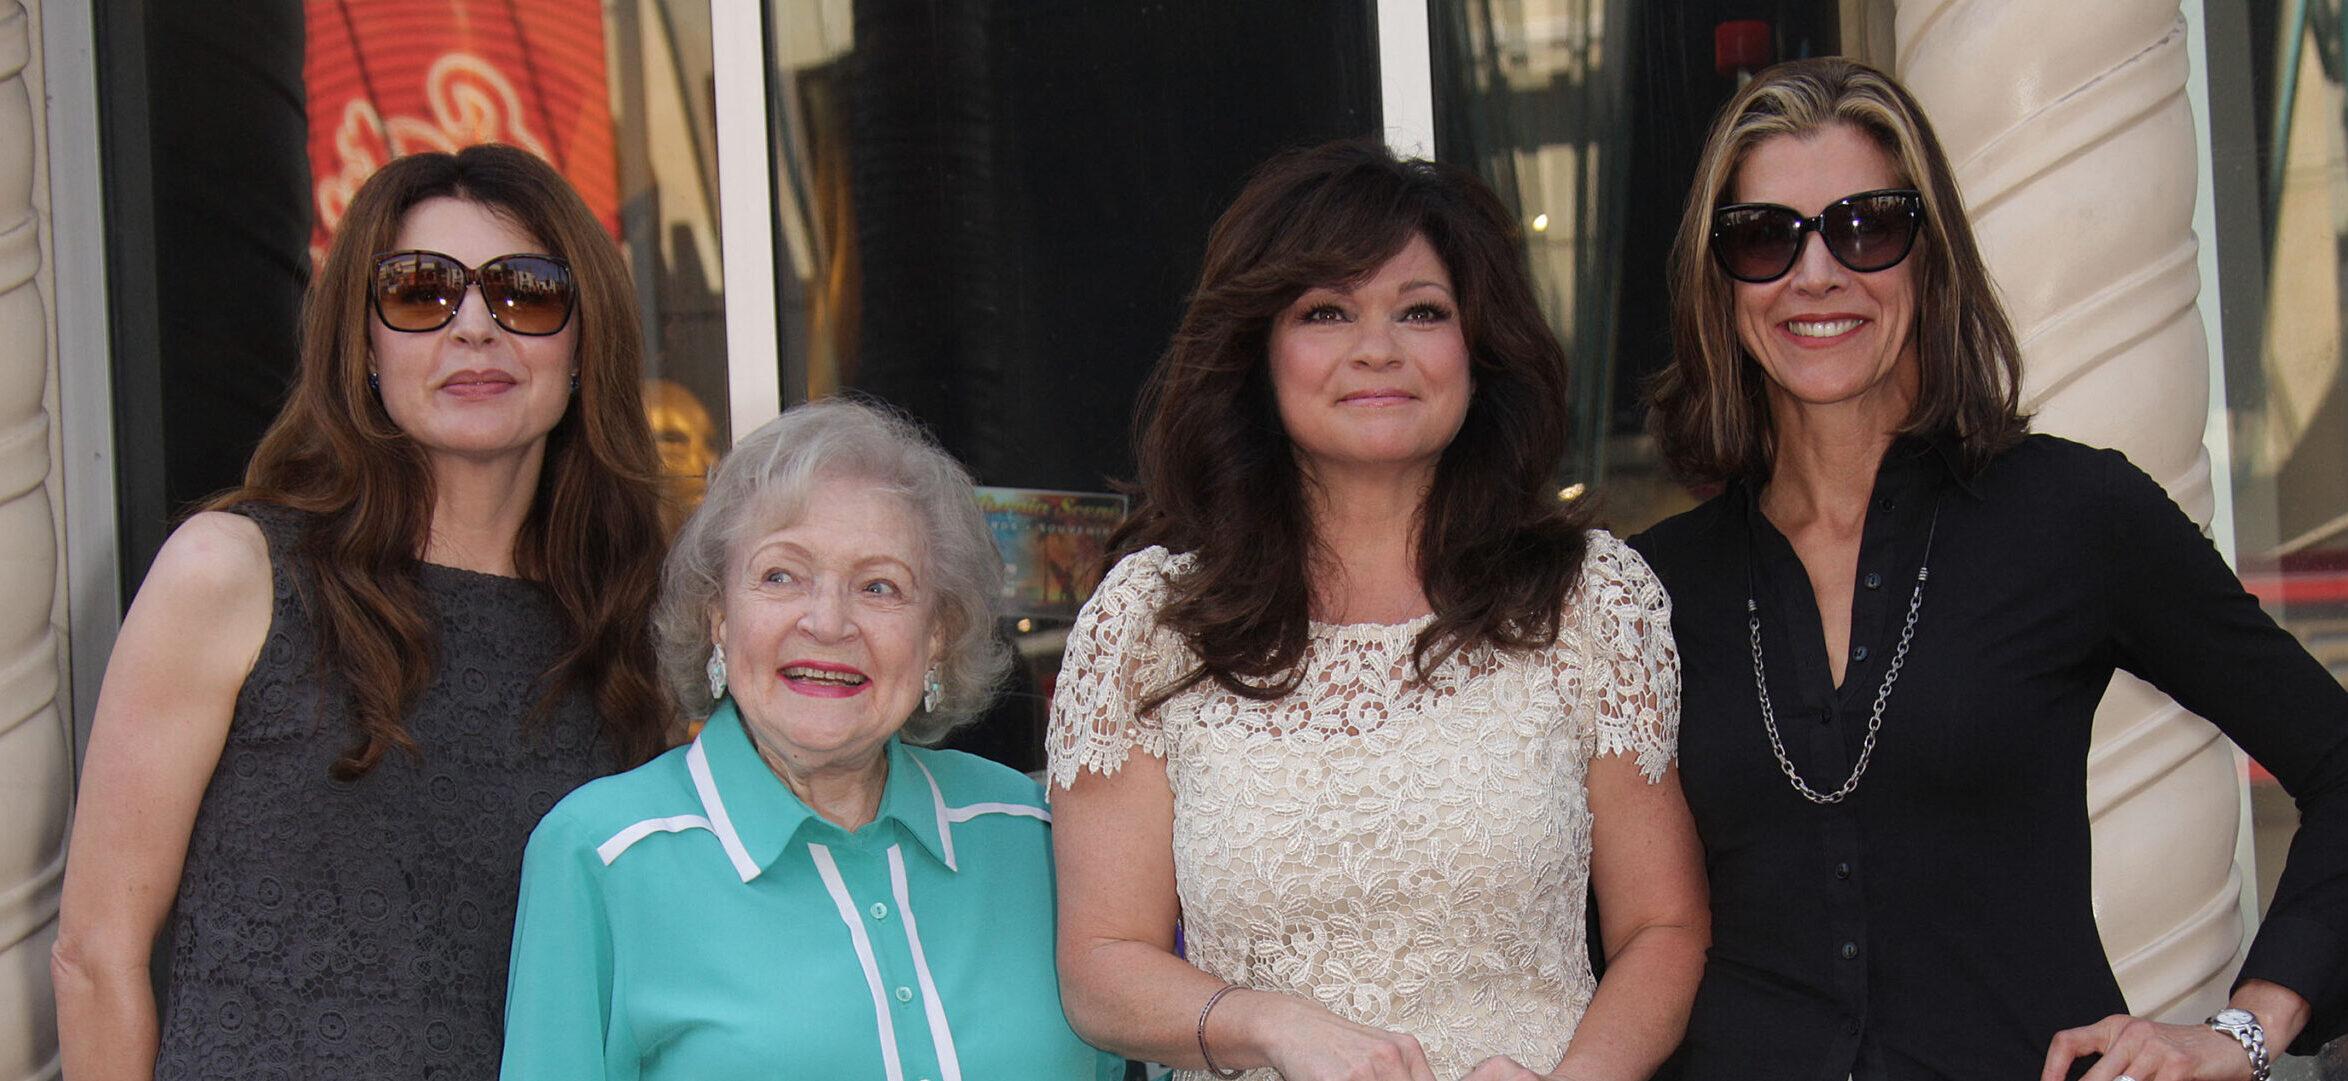 Valerie Bertinelli Dedicates Final Episode Of Cooking Show To Betty White As Fans Beg To Keep Her On